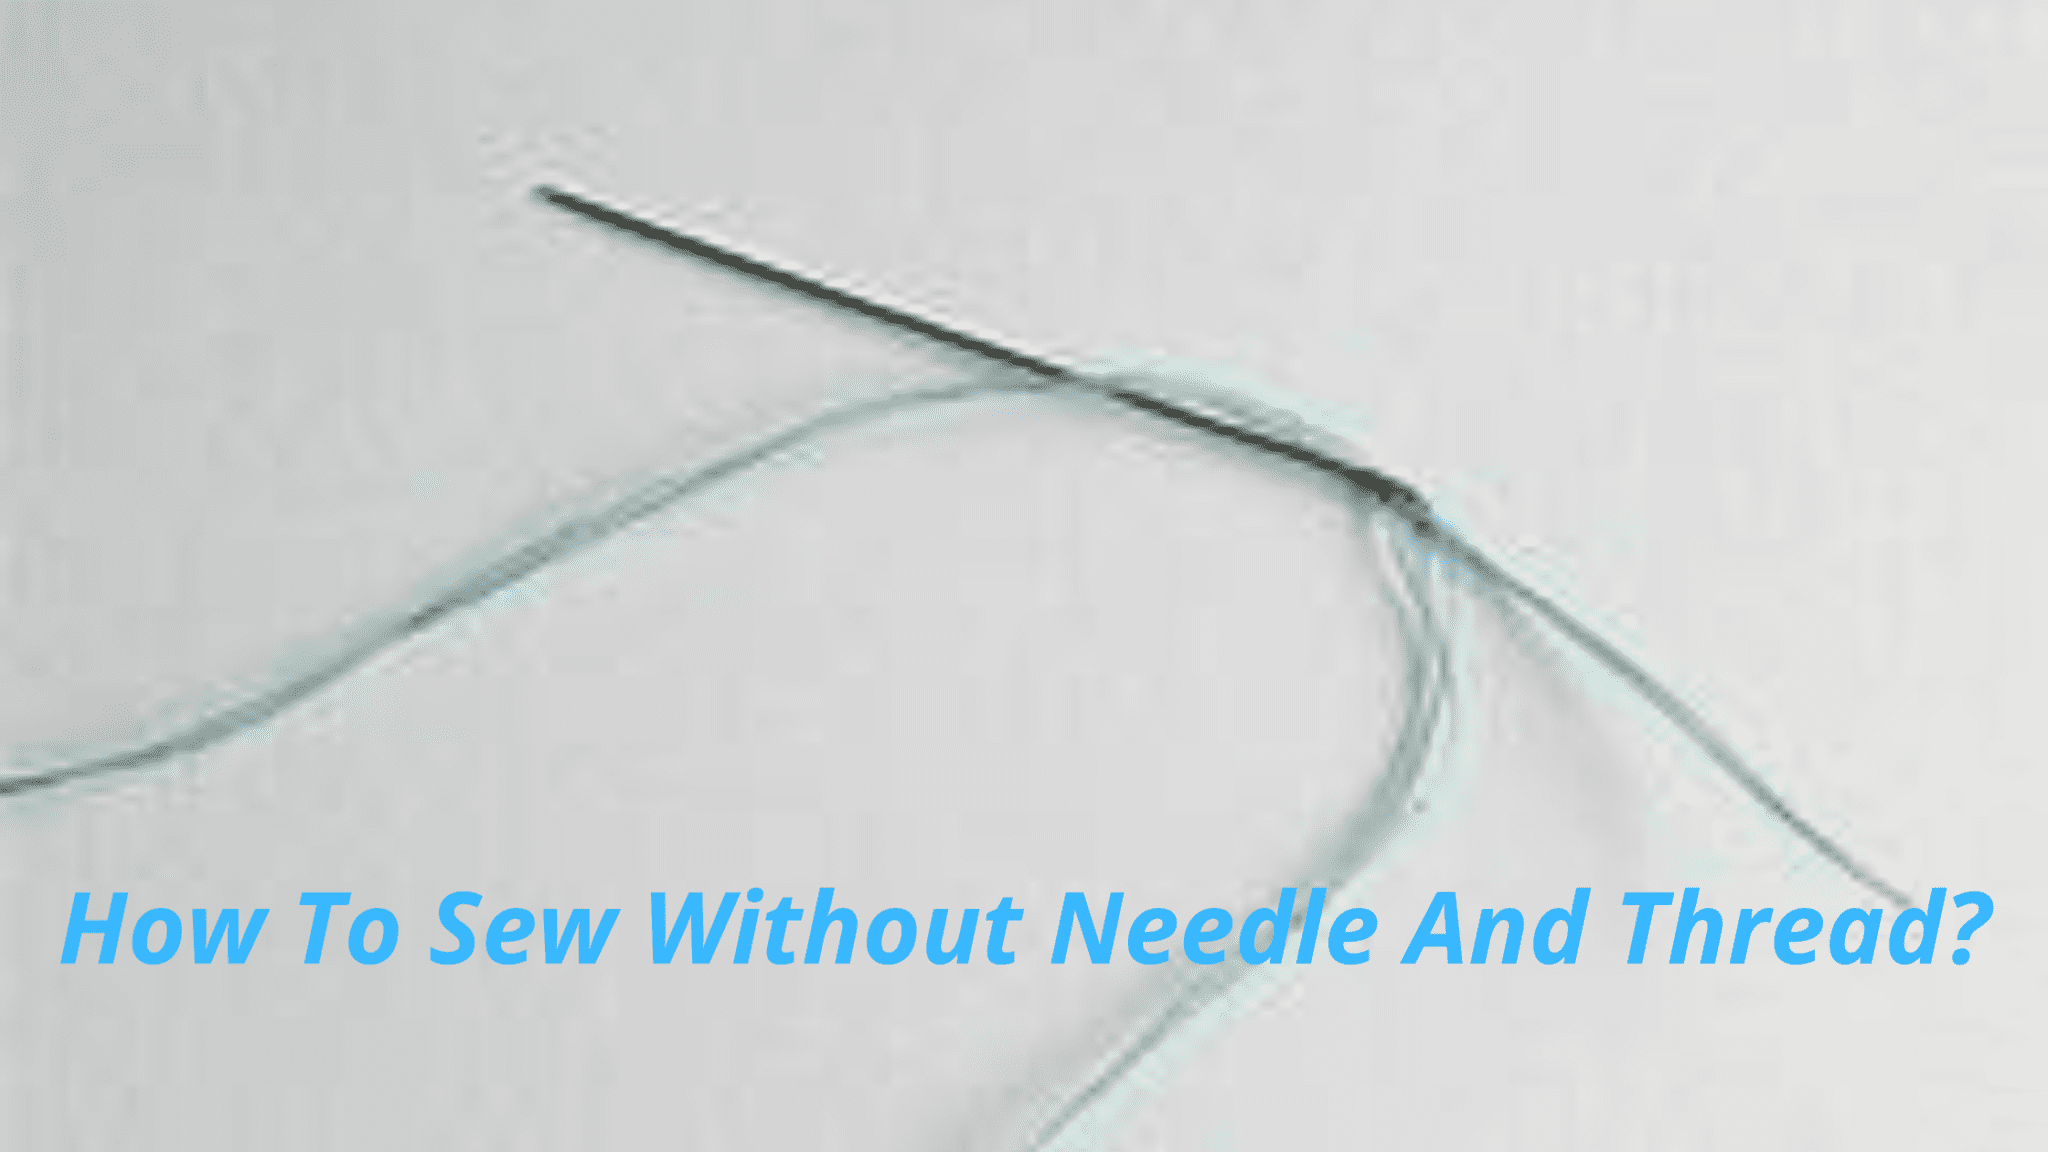 Tips To Sew Without Needle And Thread - The Art Suppliers